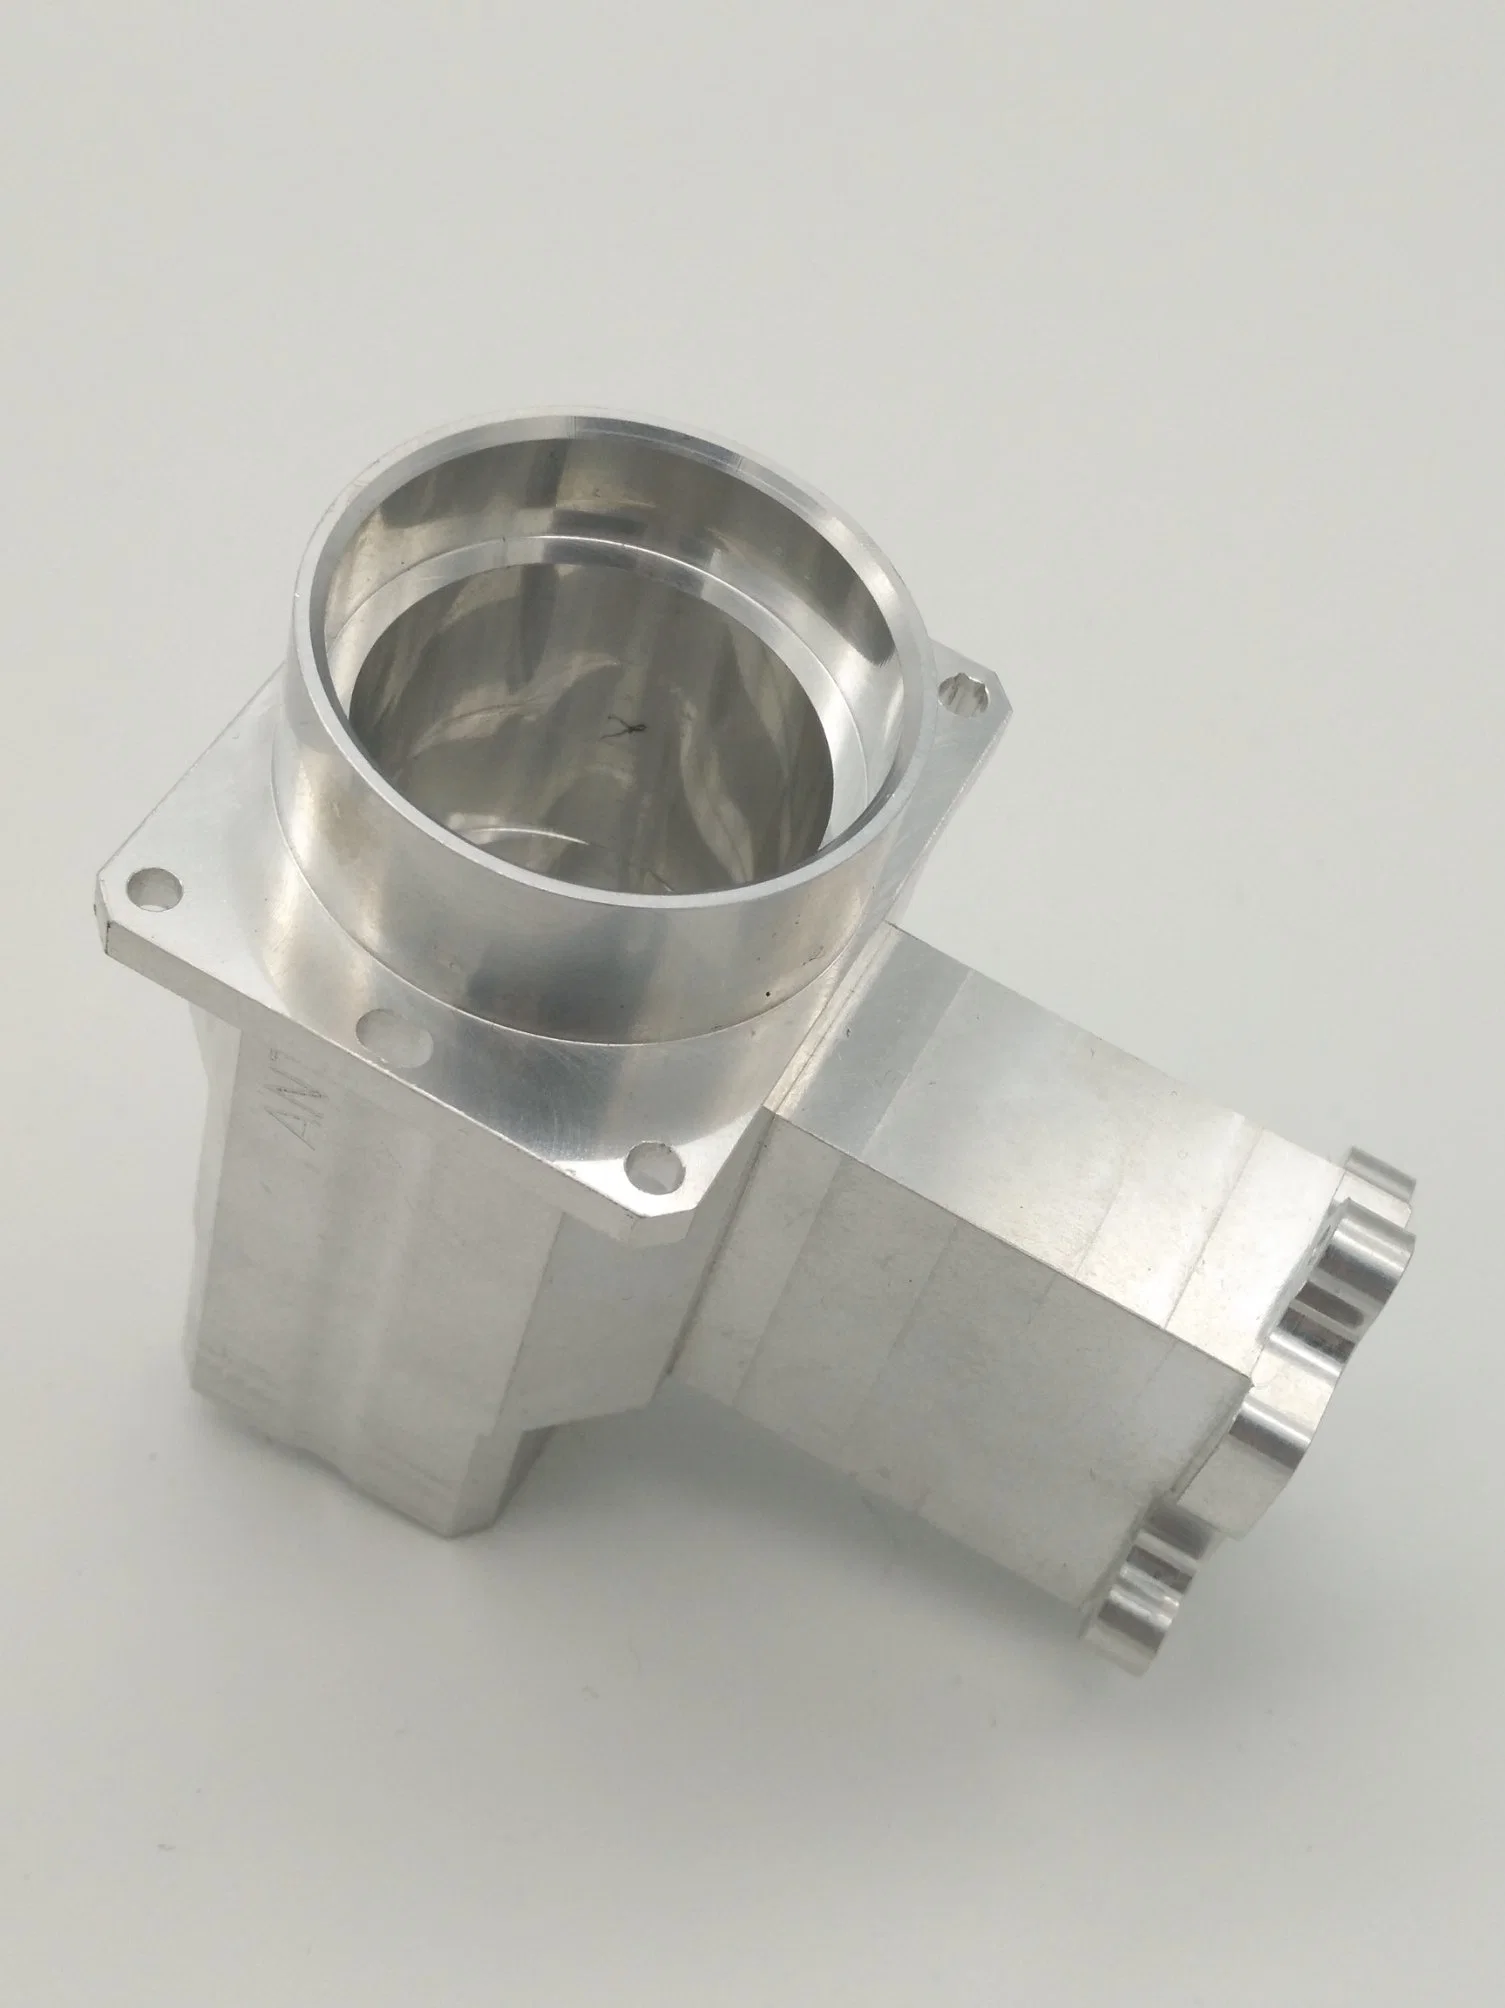 Communication CNC Milling Stainless Steel and Aluminum Alloy Processing Parts